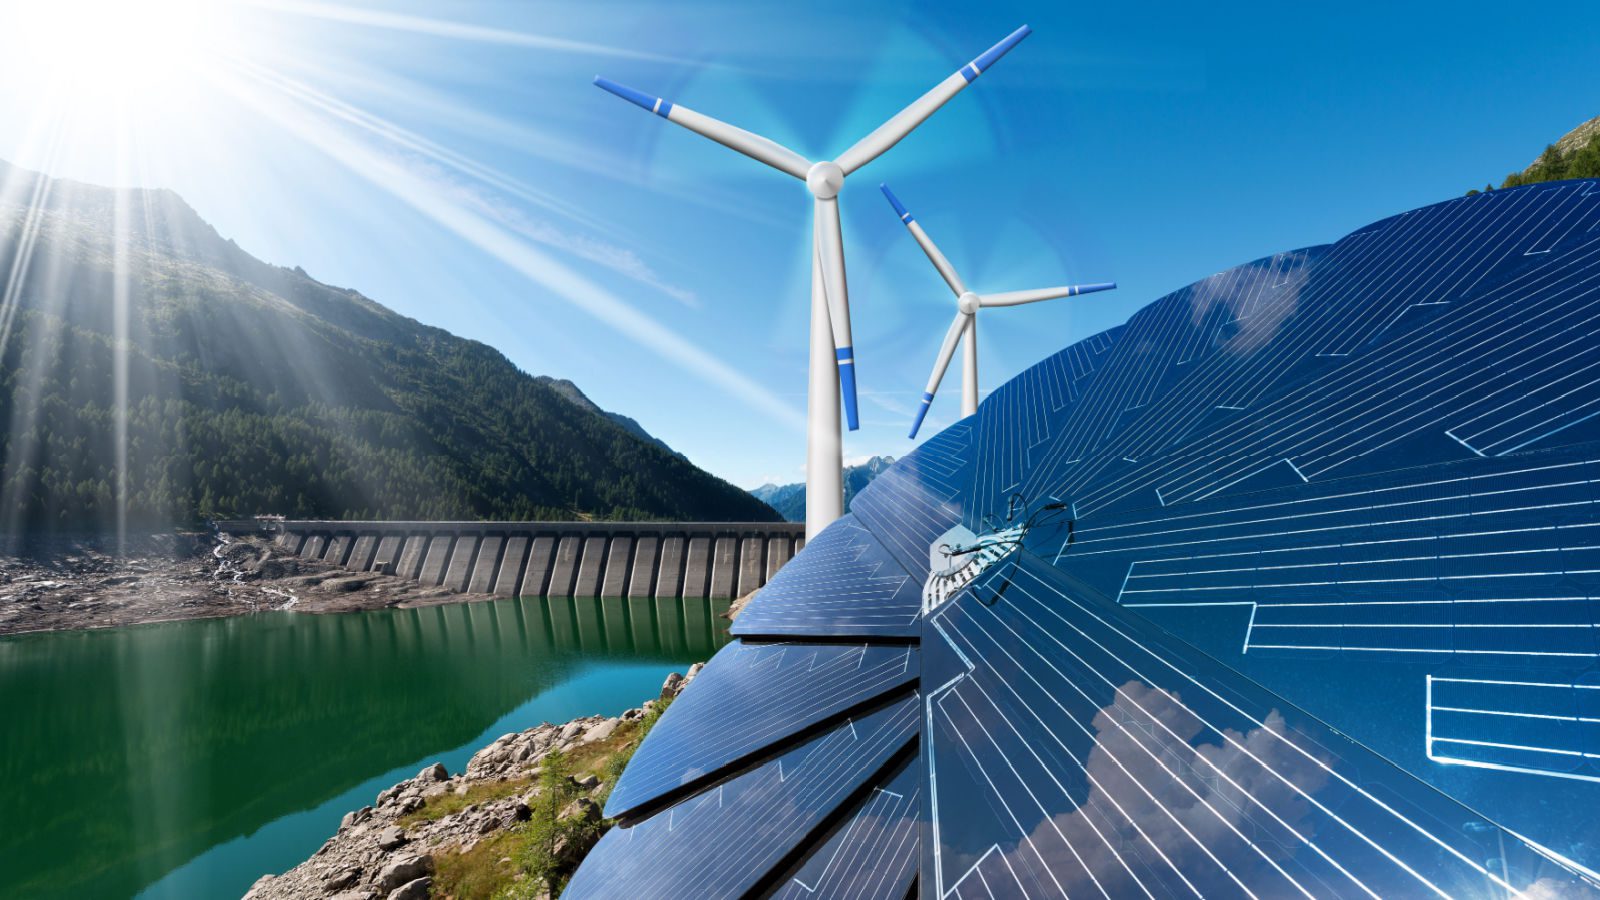 Could NPEs stifle innovation in sustainable energy?